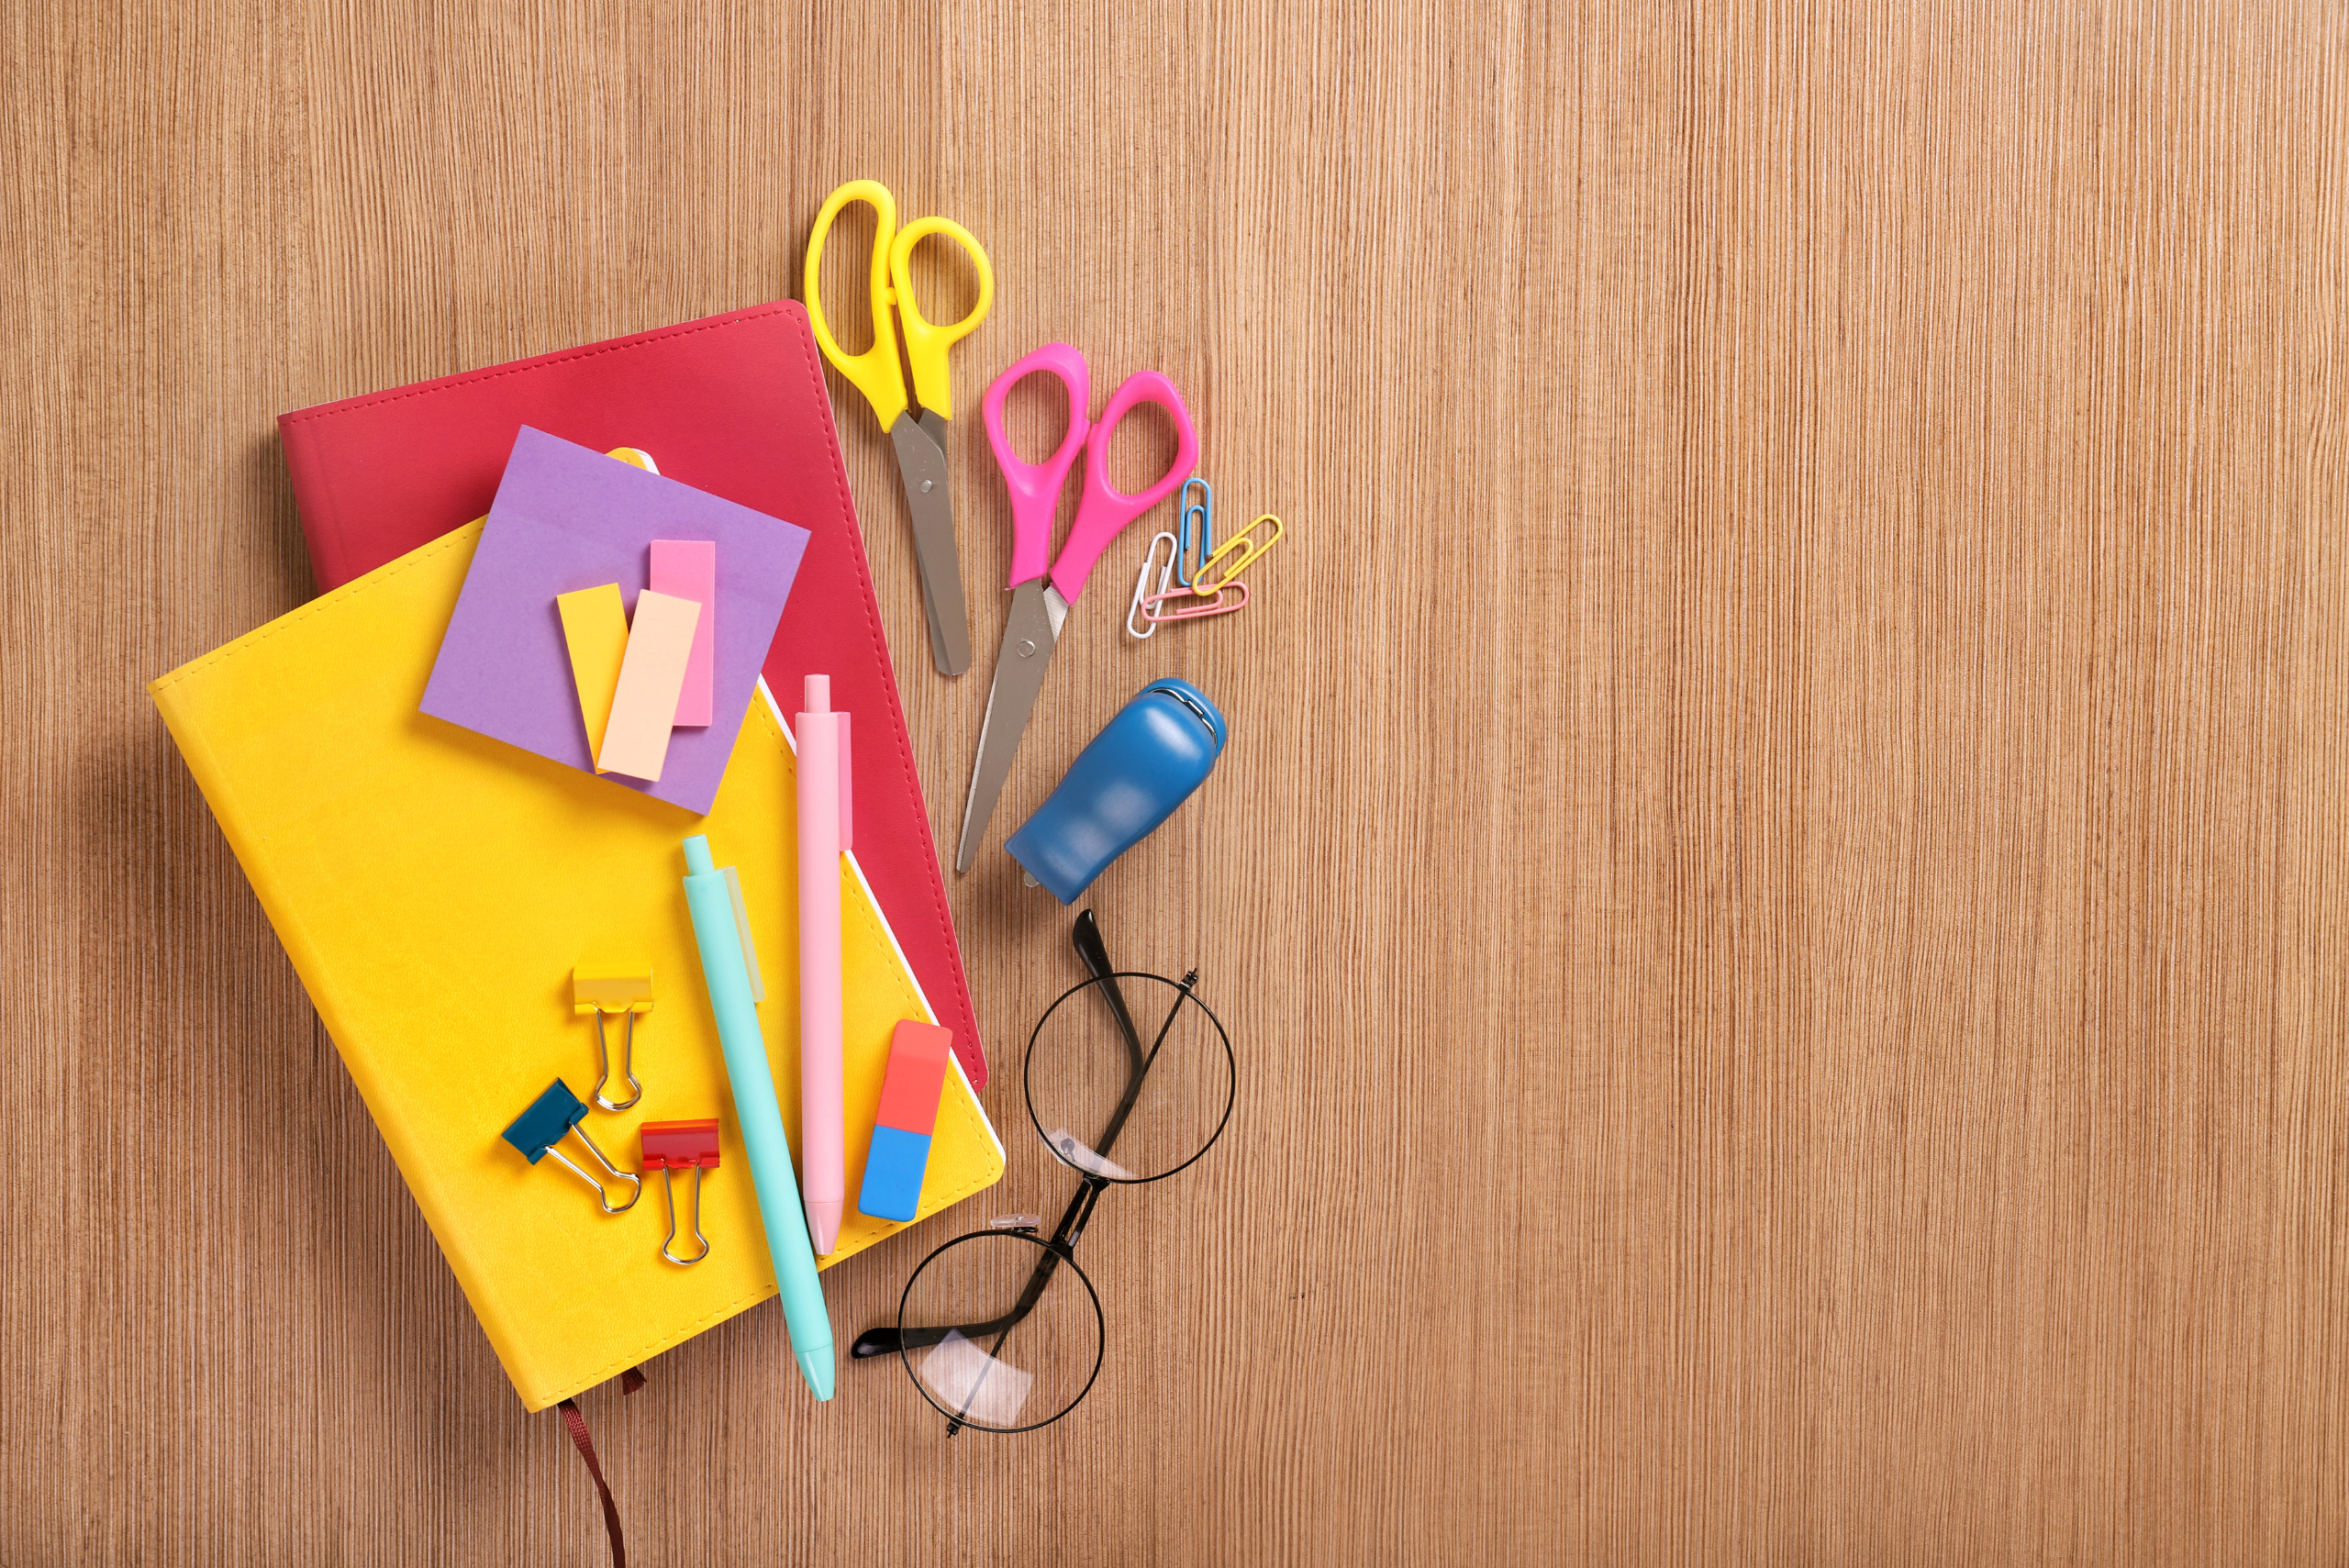 A selection of items and materials for creating a DIY busy board.